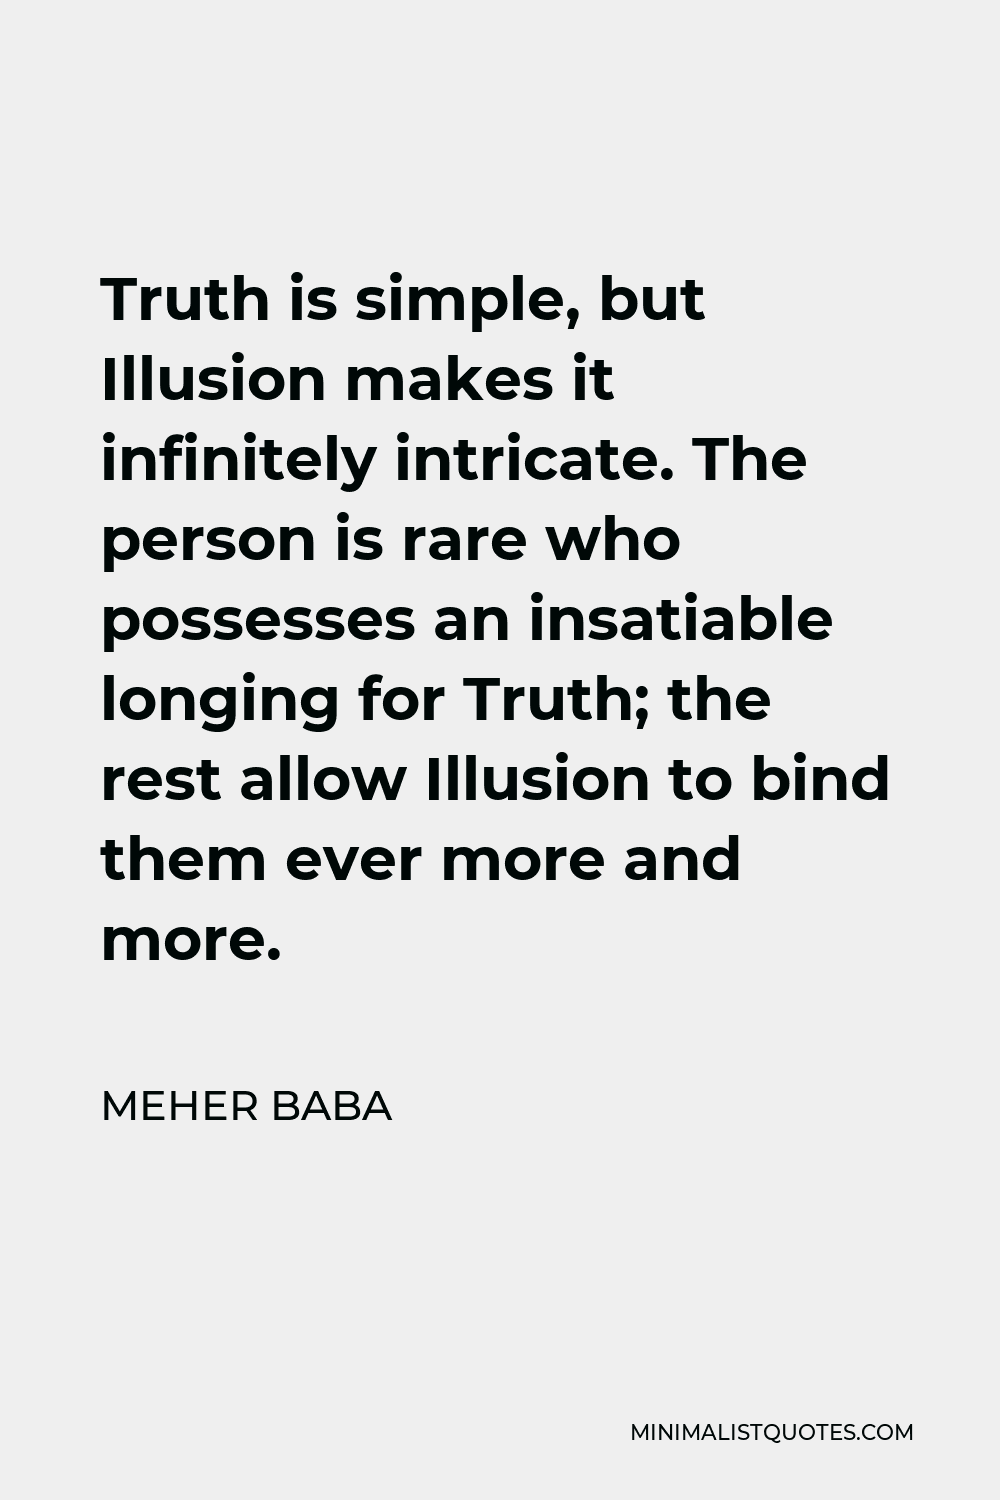 Meher Baba Quote - Truth is simple, but Illusion makes it infinitely intricate. The person is rare who possesses an insatiable longing for Truth; the rest allow Illusion to bind them ever more and more.